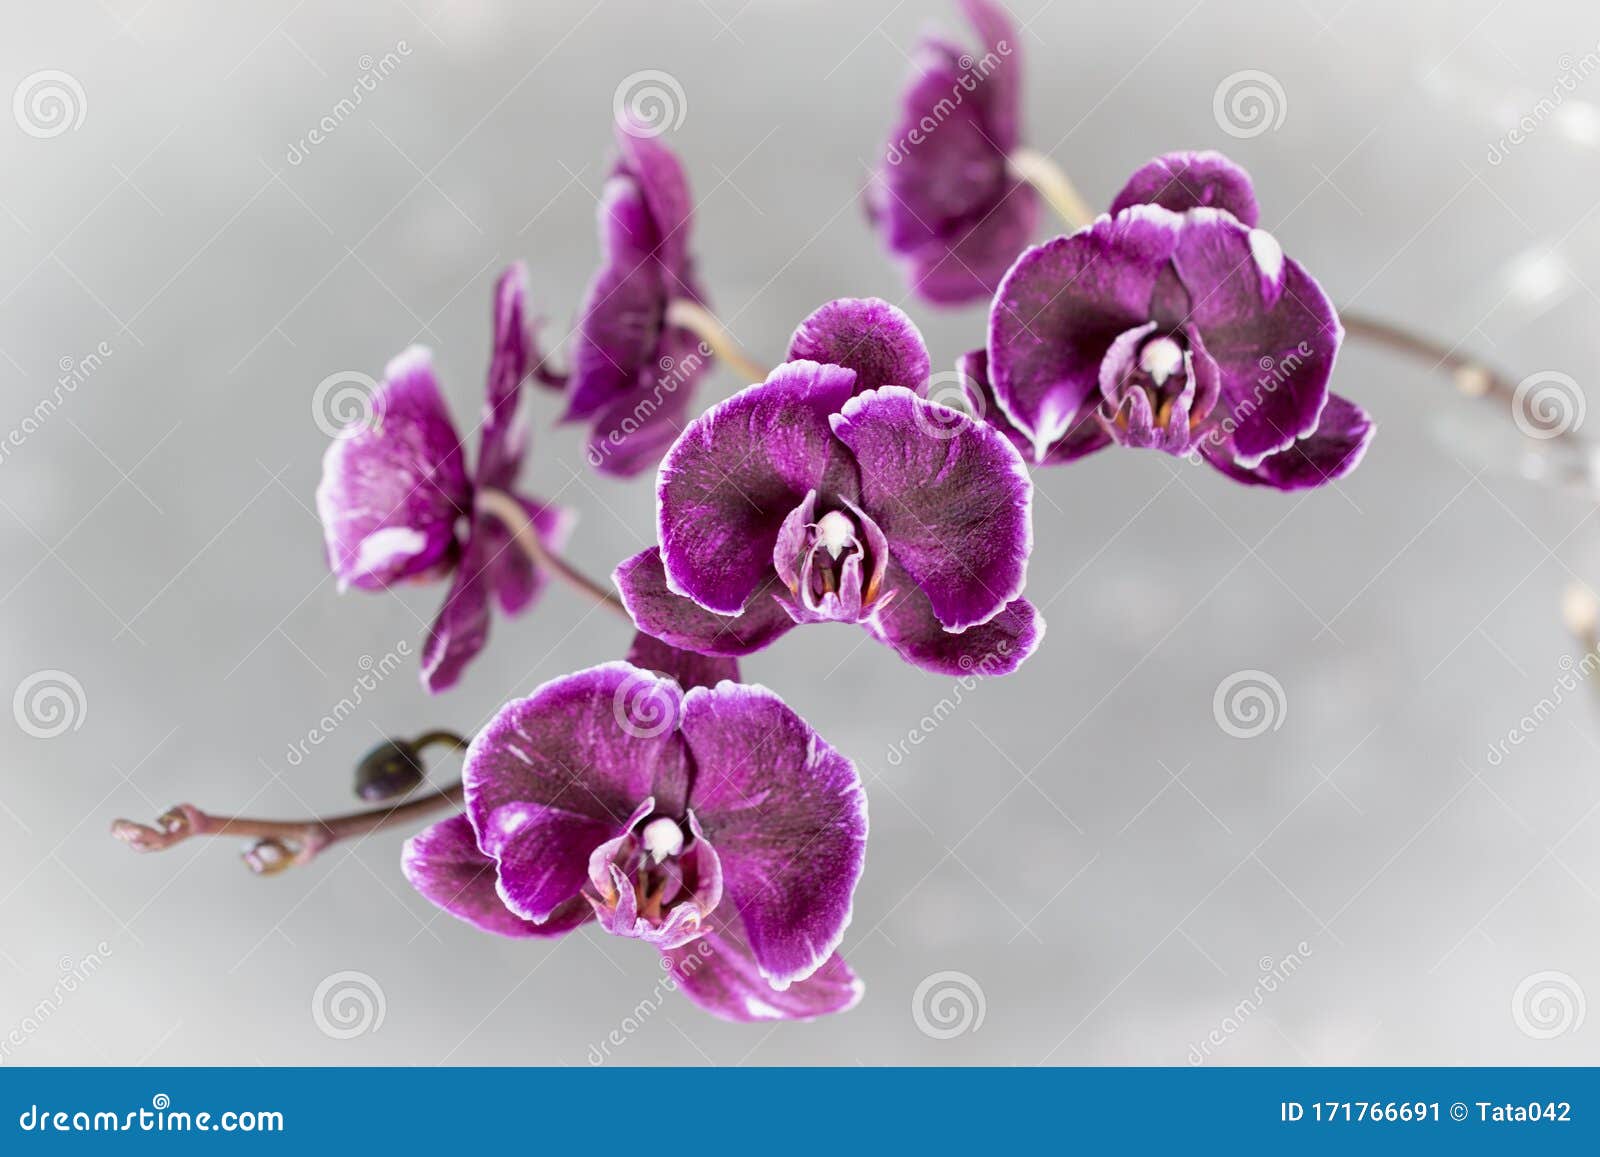 Rare Flowering Purple Orchid of the Genus Phalaenopsis Varieties of Chiada  Stacy Chocolate Drop on Blurred Background, Close-up Stock Image - Image of  lush, daytime: 171766691